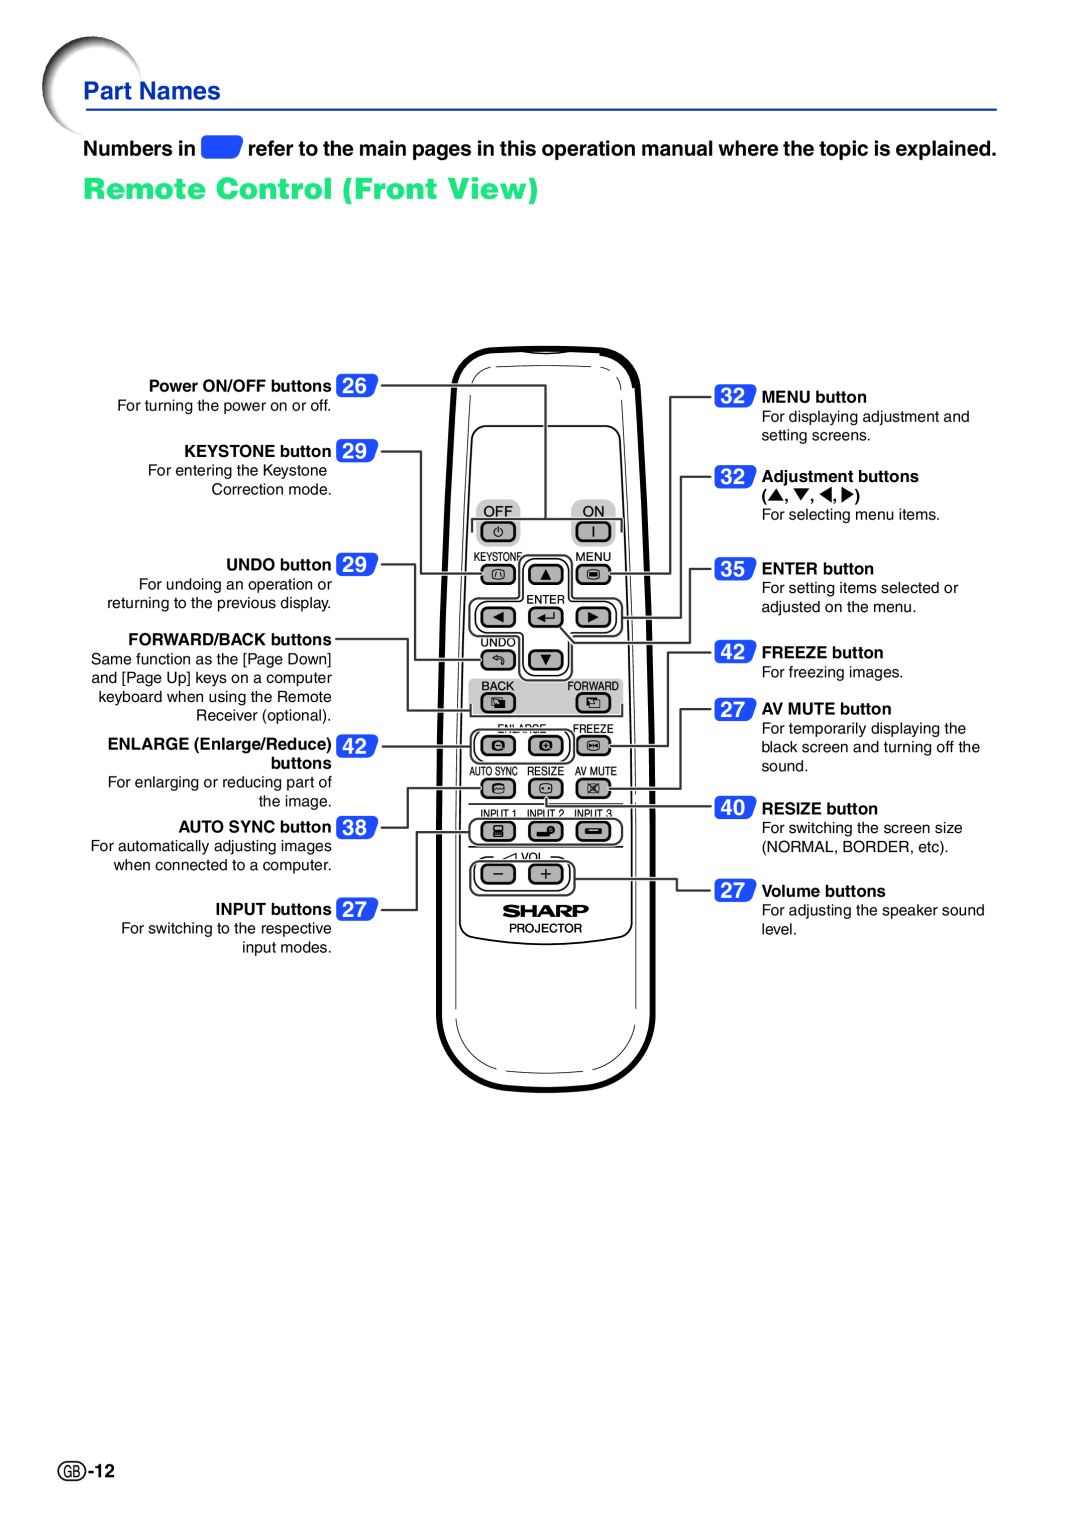 Sharp PG-A10X operation manual Remote Control Front View, Part Names 